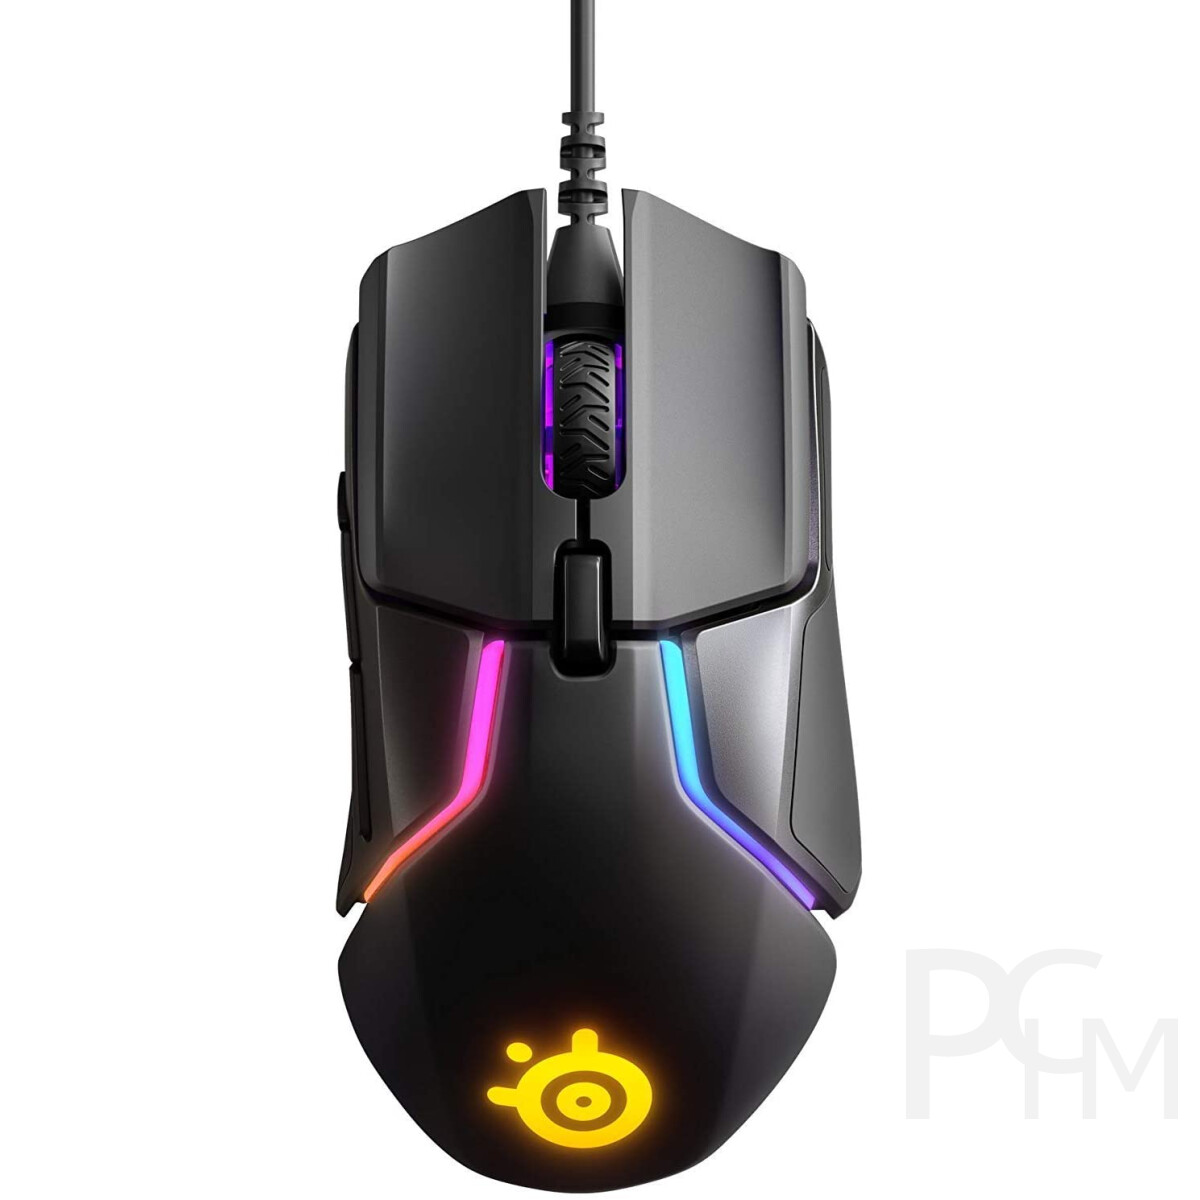 PCHM, Maus - € - Gaming SteelSeries Rival 12.000 79,99 DPI 600